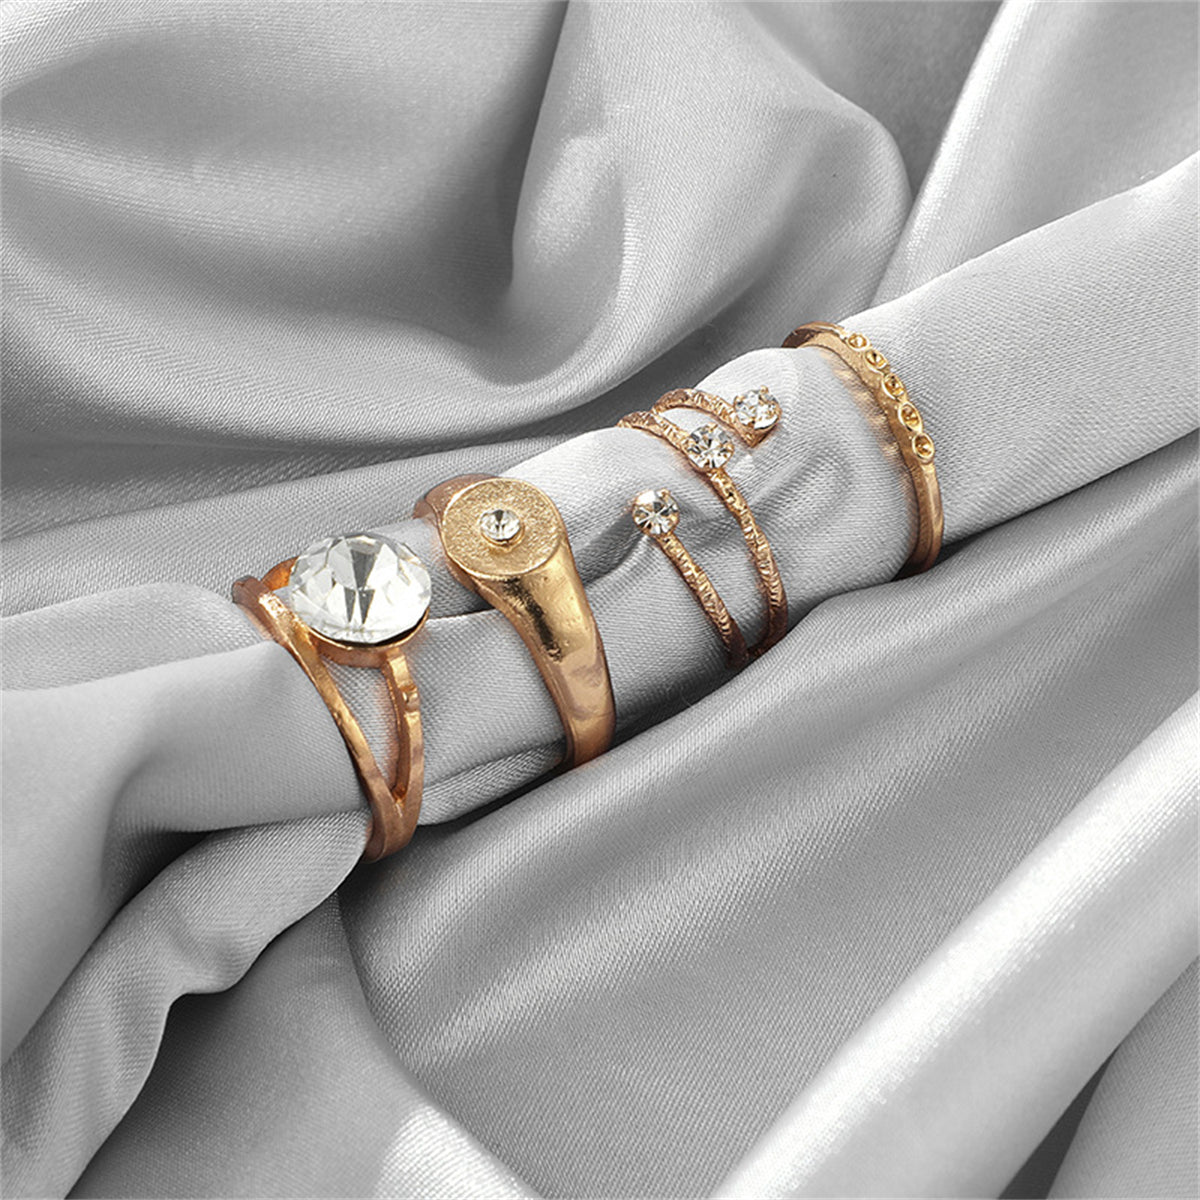 Cubic Zirconia & 18K Gold-Plated Layered Ring Set